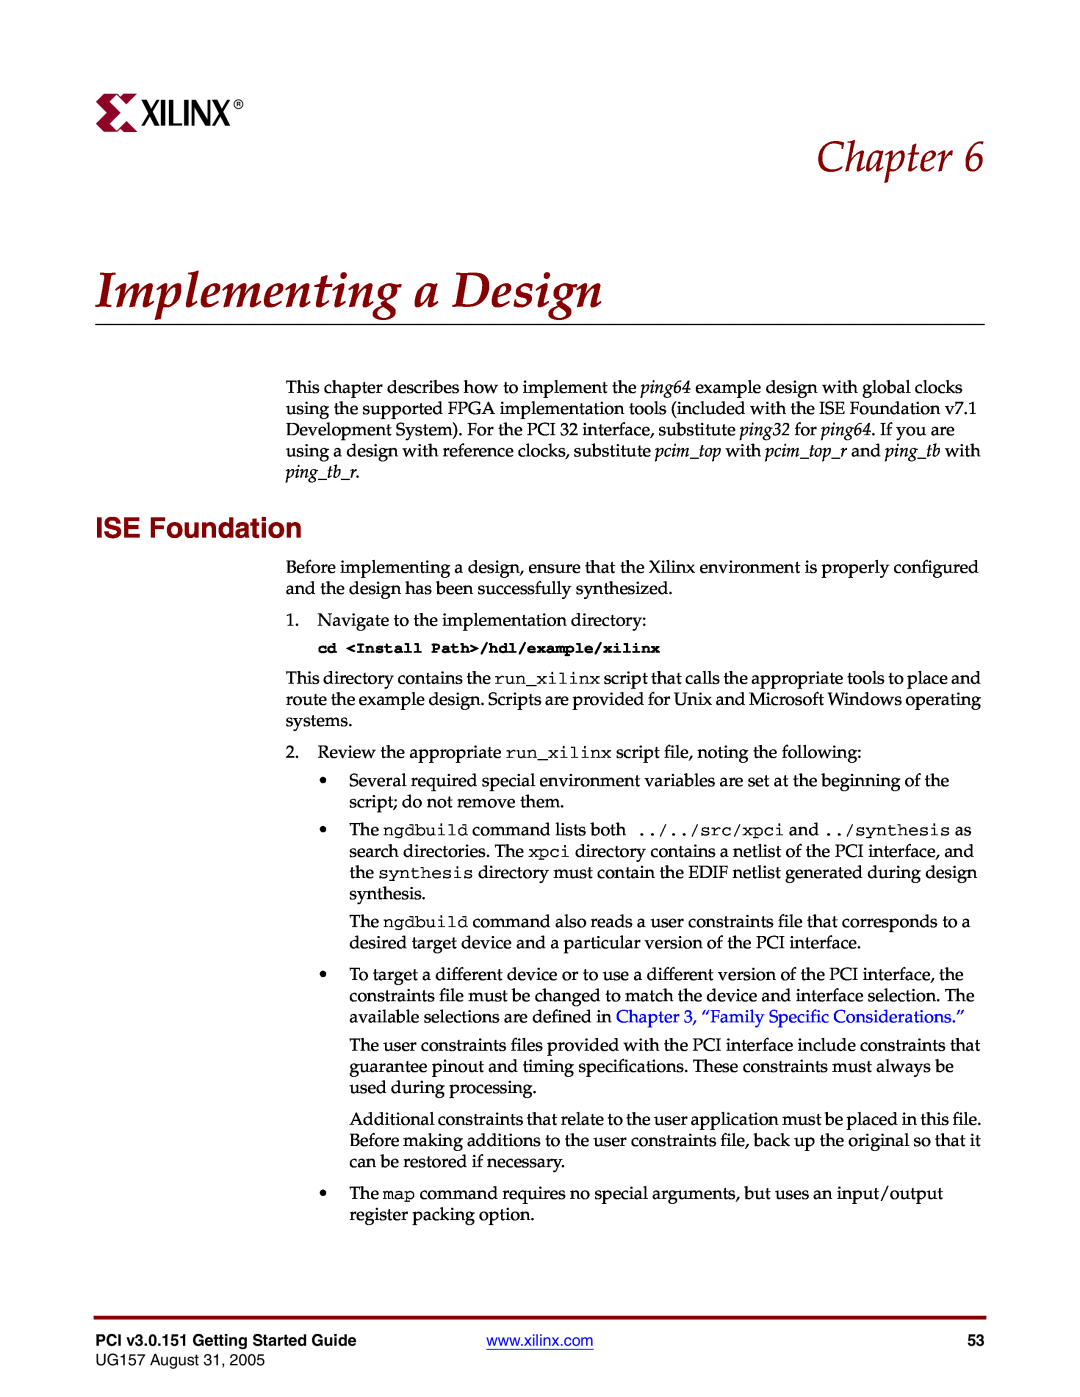 Xilinx PCI v3.0 manual Implementing a Design, ISE Foundation, Chapter 